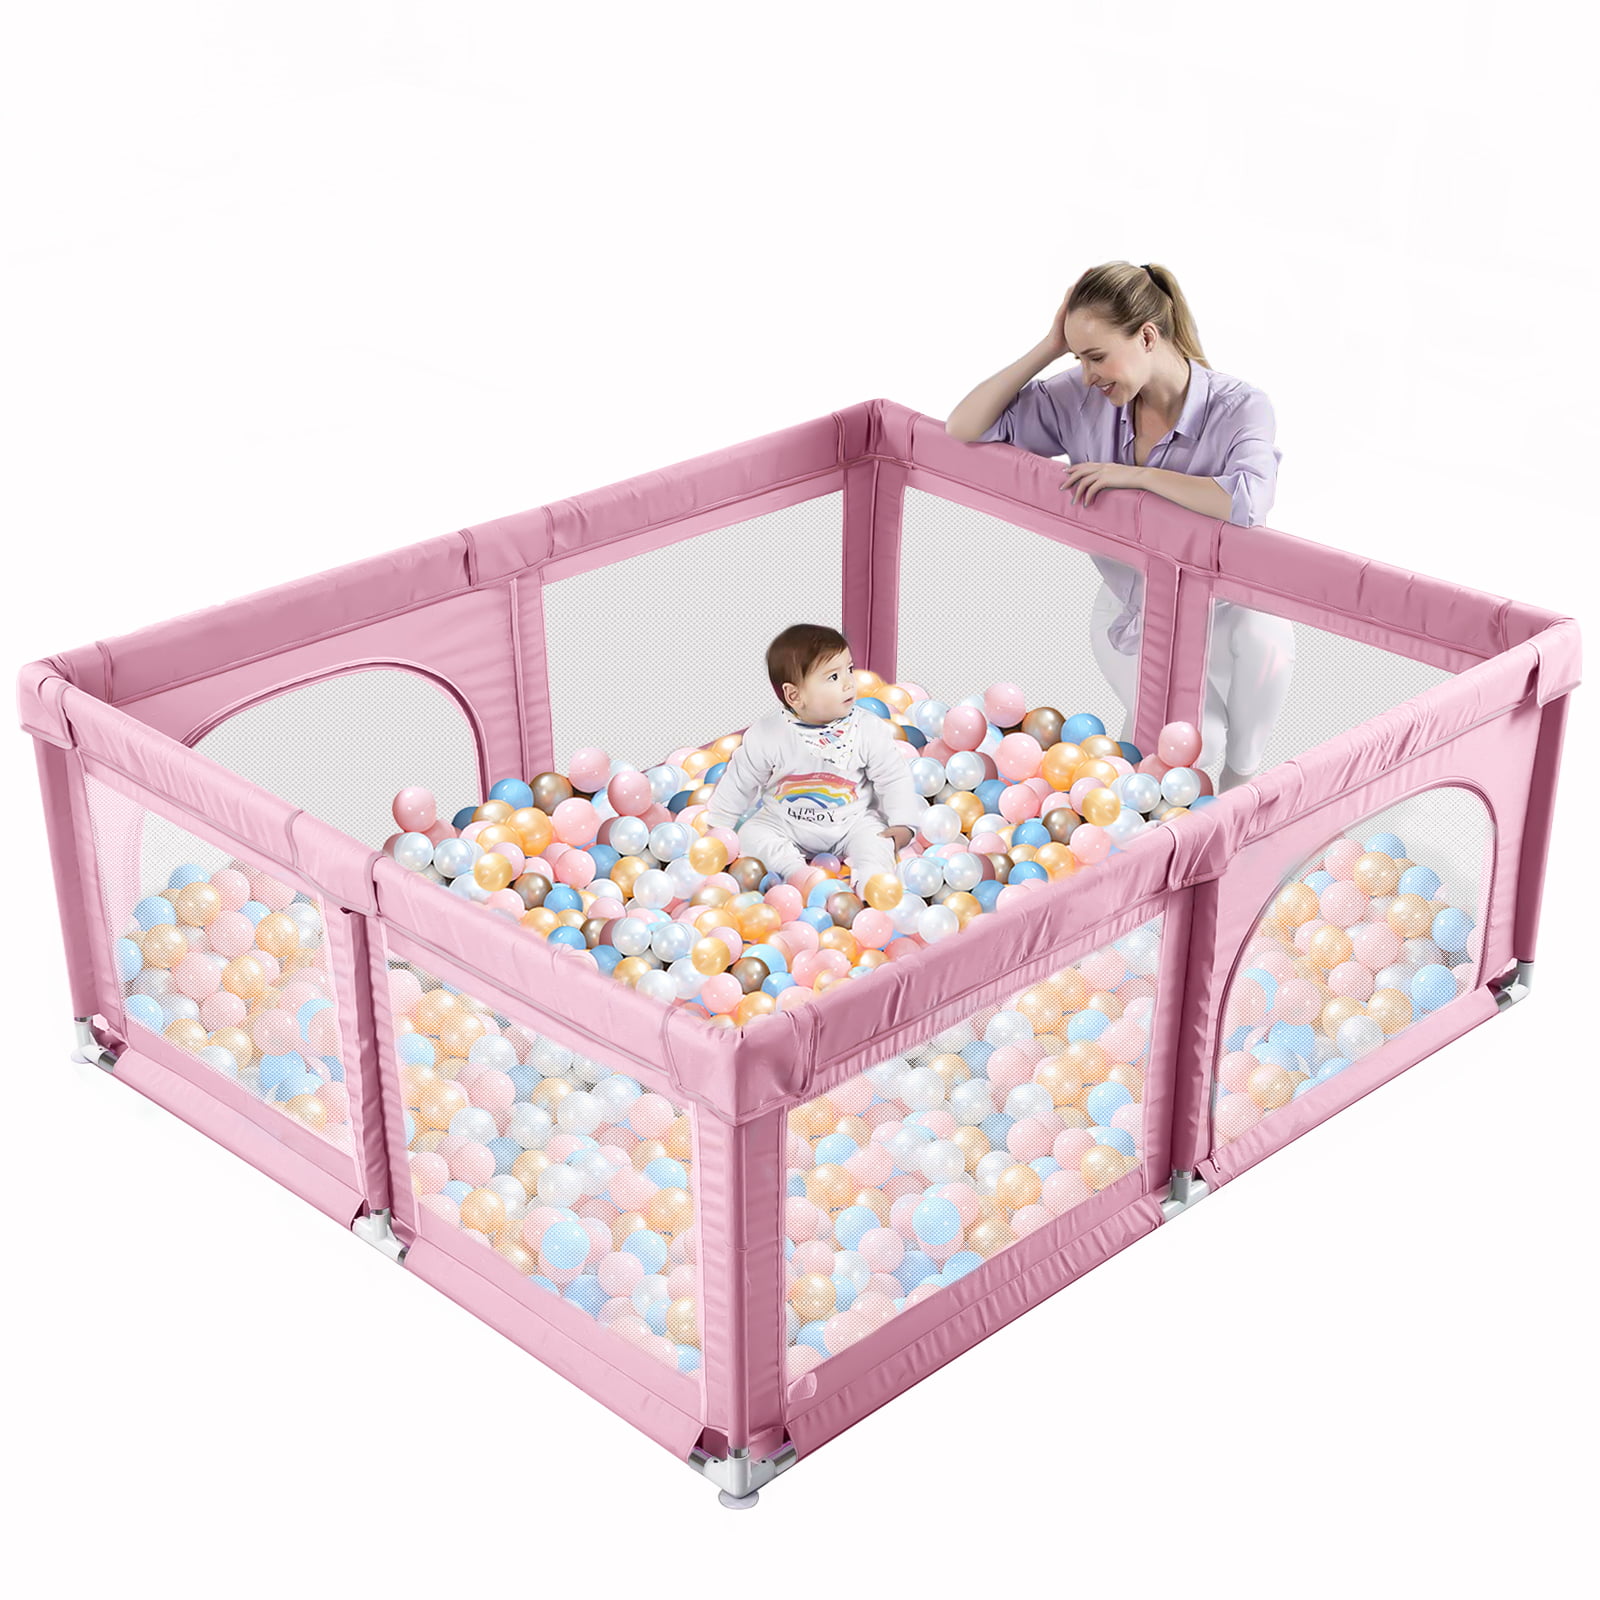 Security Fence，in-Bed Childrens Activity Center 1 Piece Pink Bed Bumpers for Toddlers，Baby playpen 